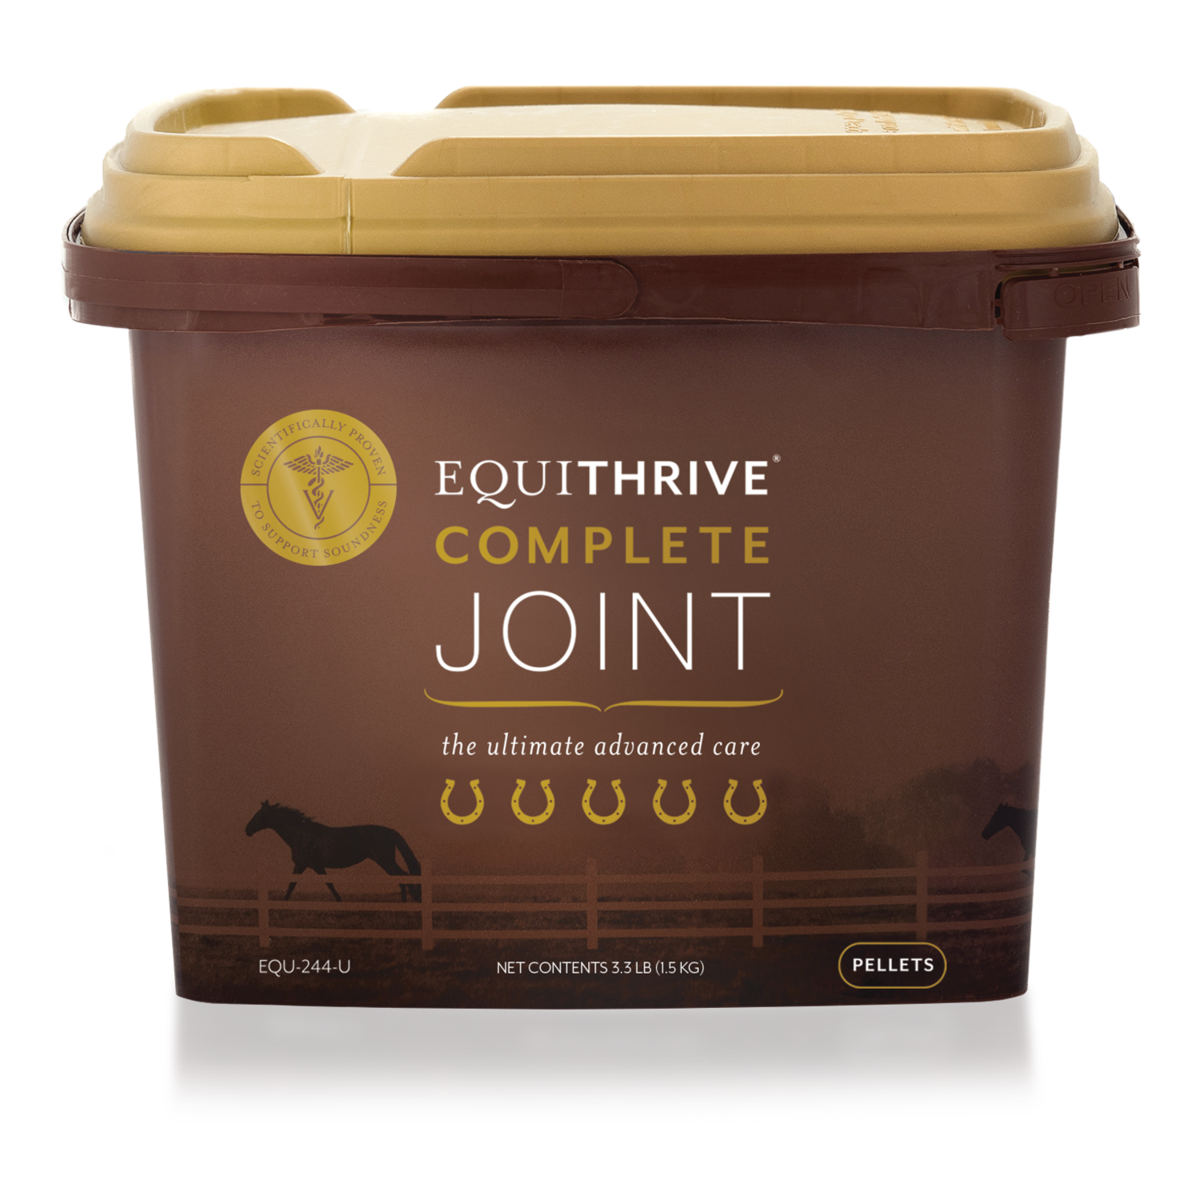 Equithrive Complete Joint Pellets